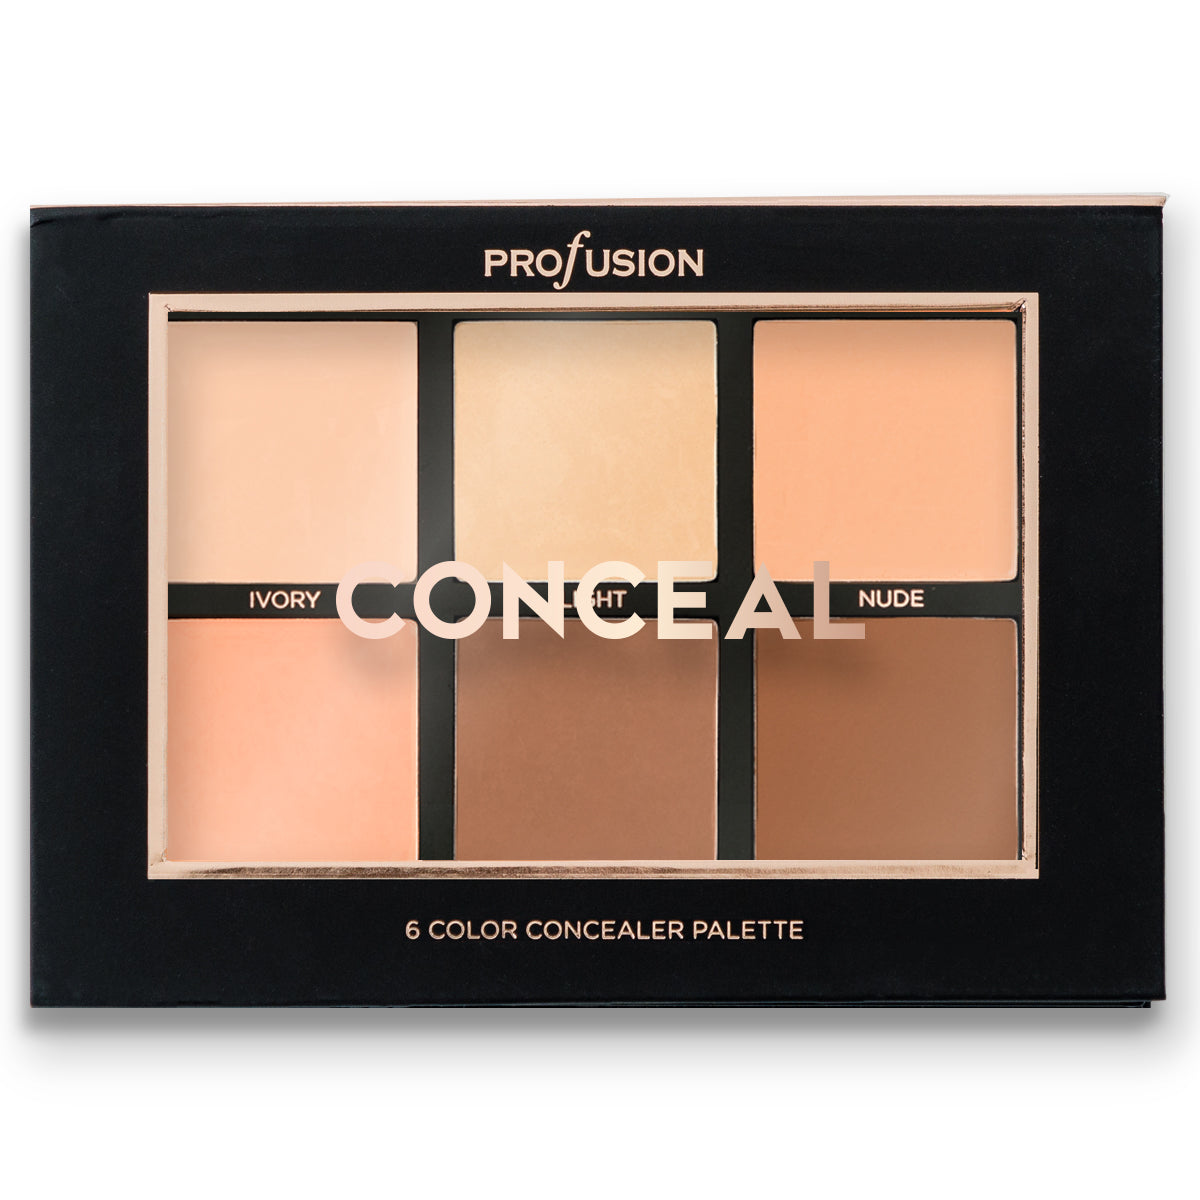 CONCEAL | Studio Icon Collection - profusion US